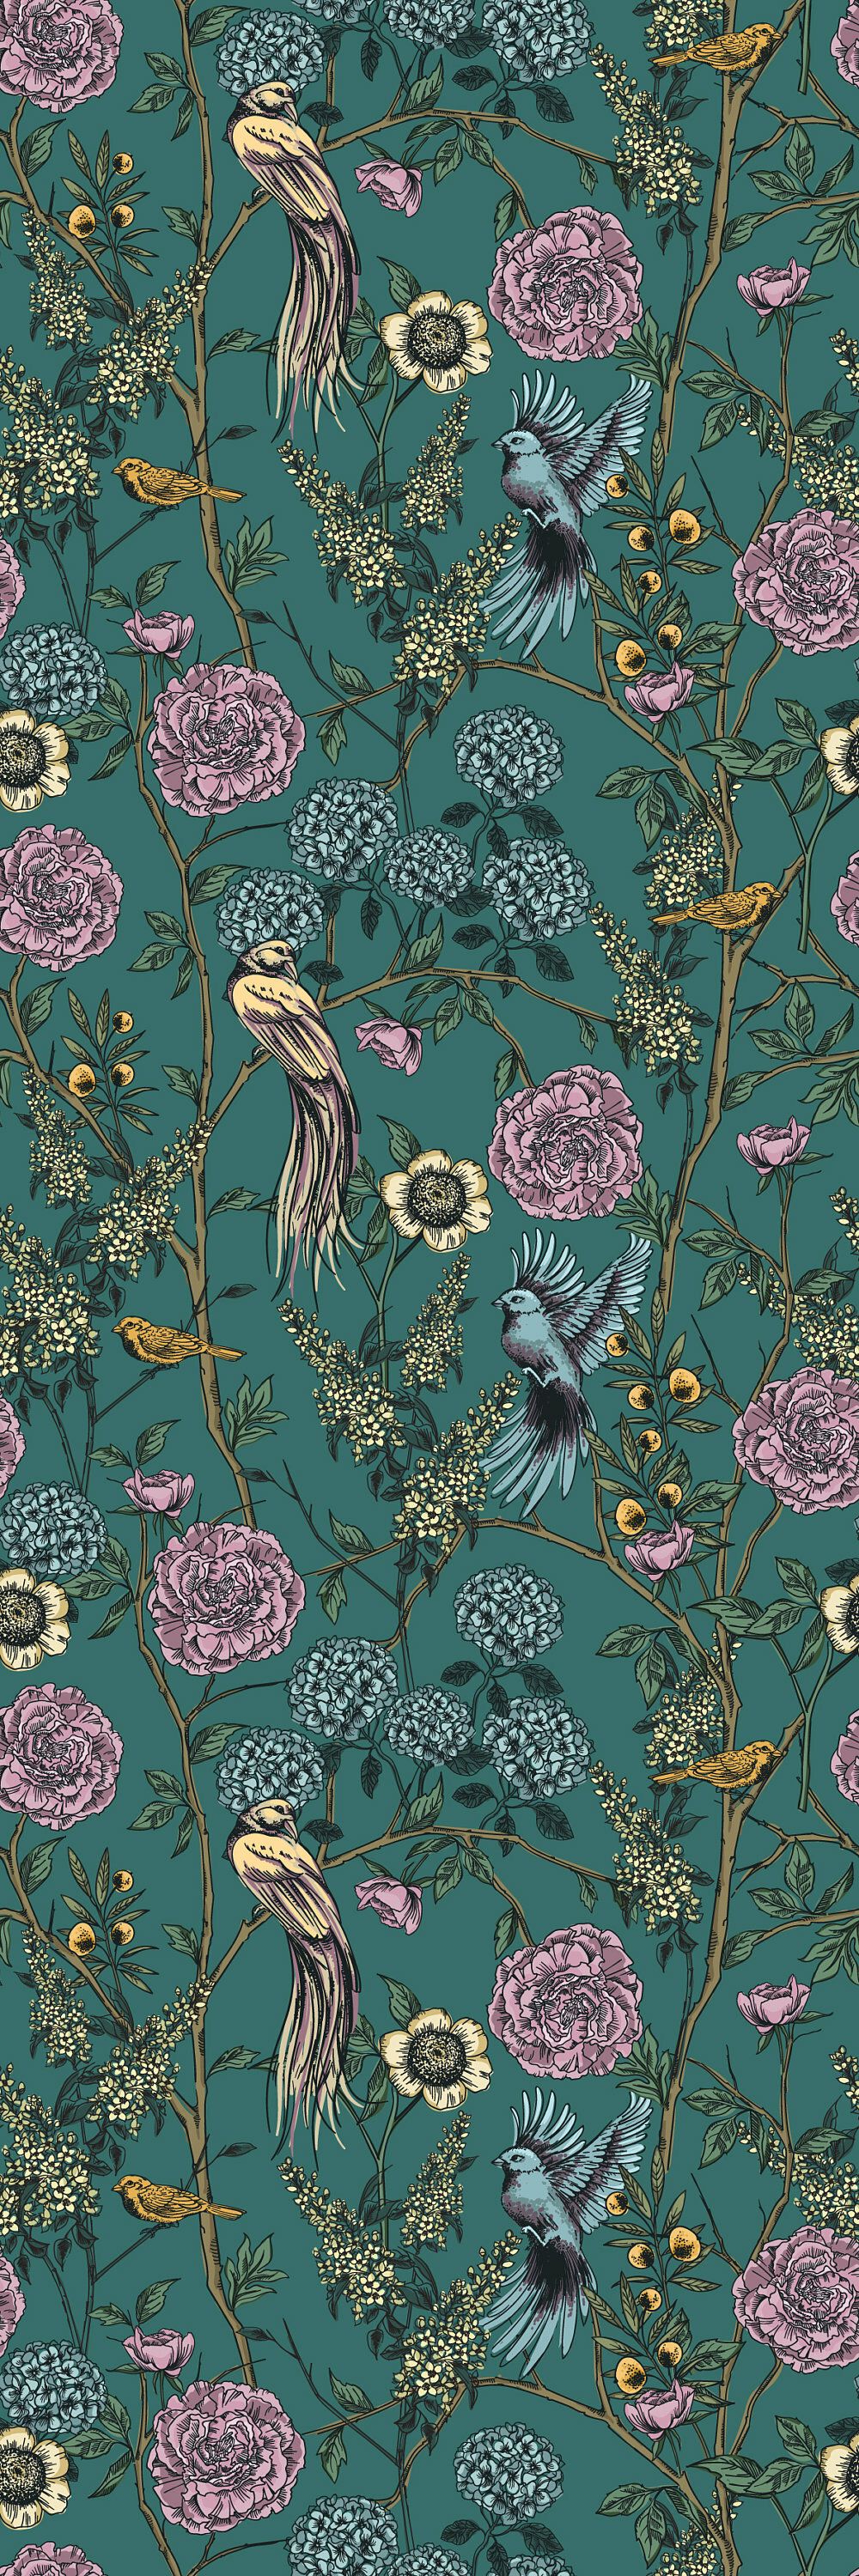 World Menagerie Nautilus Removable Vintage Floral Birds 4.17' L x 25 W Peel and Stick Wallpaper Roll